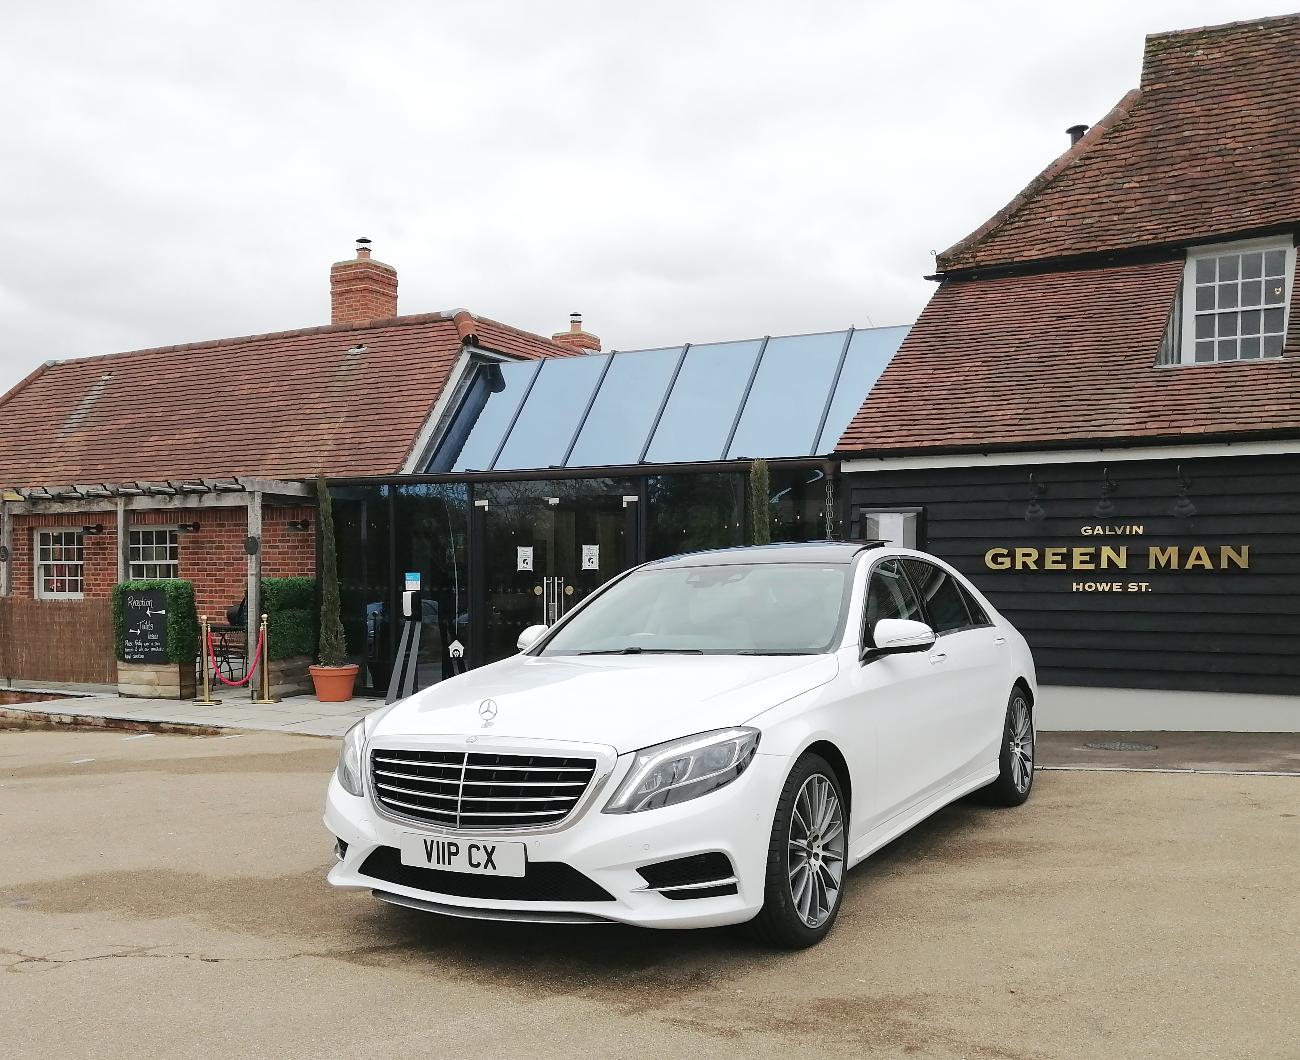 Gallery Luxury Essex Chauffeur Cars 150+ 5* Reviews gallery image 13